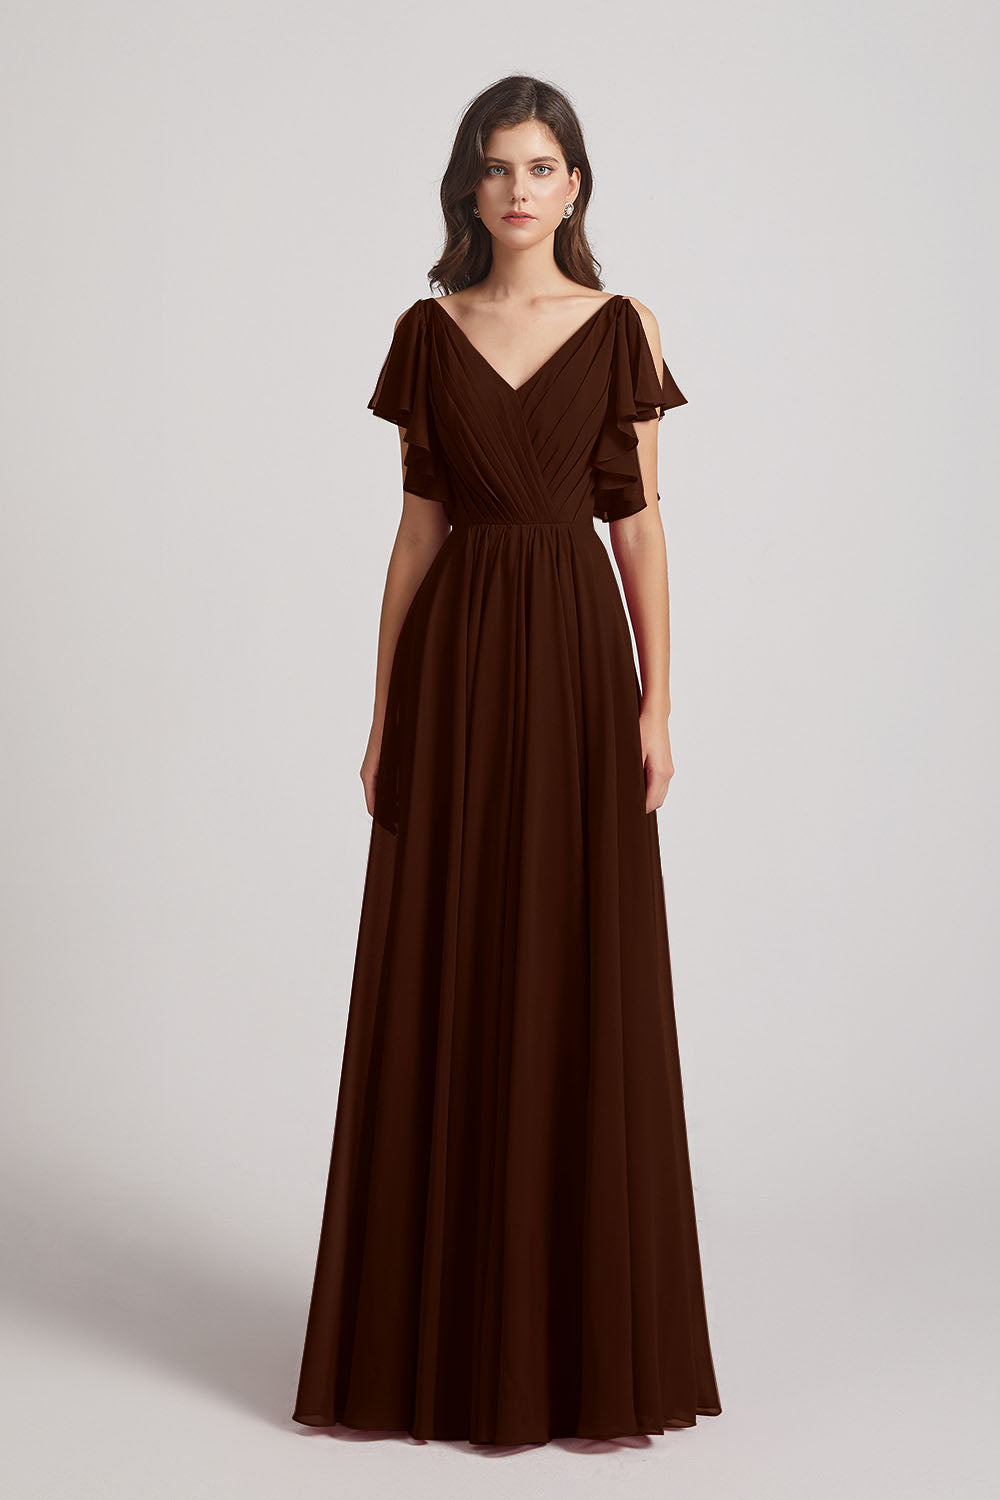 Alfa Bridal Chocolate V-Neck Pleated Chiffon Bridesmaid Dresses with Open Flutter Sleeves (AF0098)